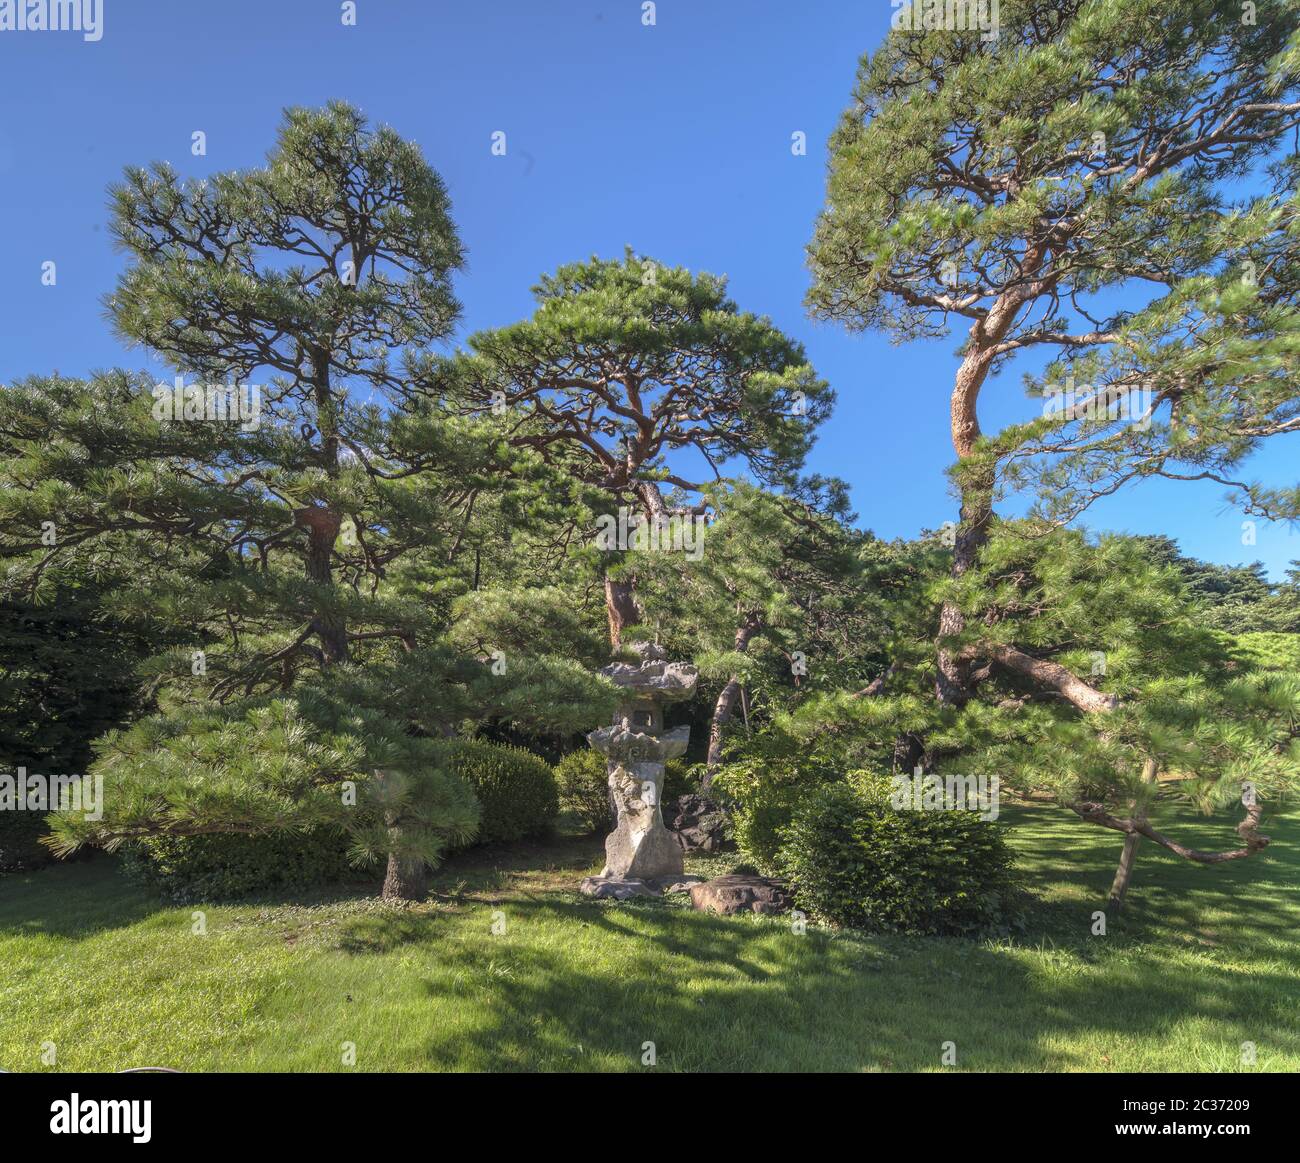 Green lawn and rounded stone lantern under pines trees and blue sky in Shinjuku Gyoen Garden in Toky Stock Photo